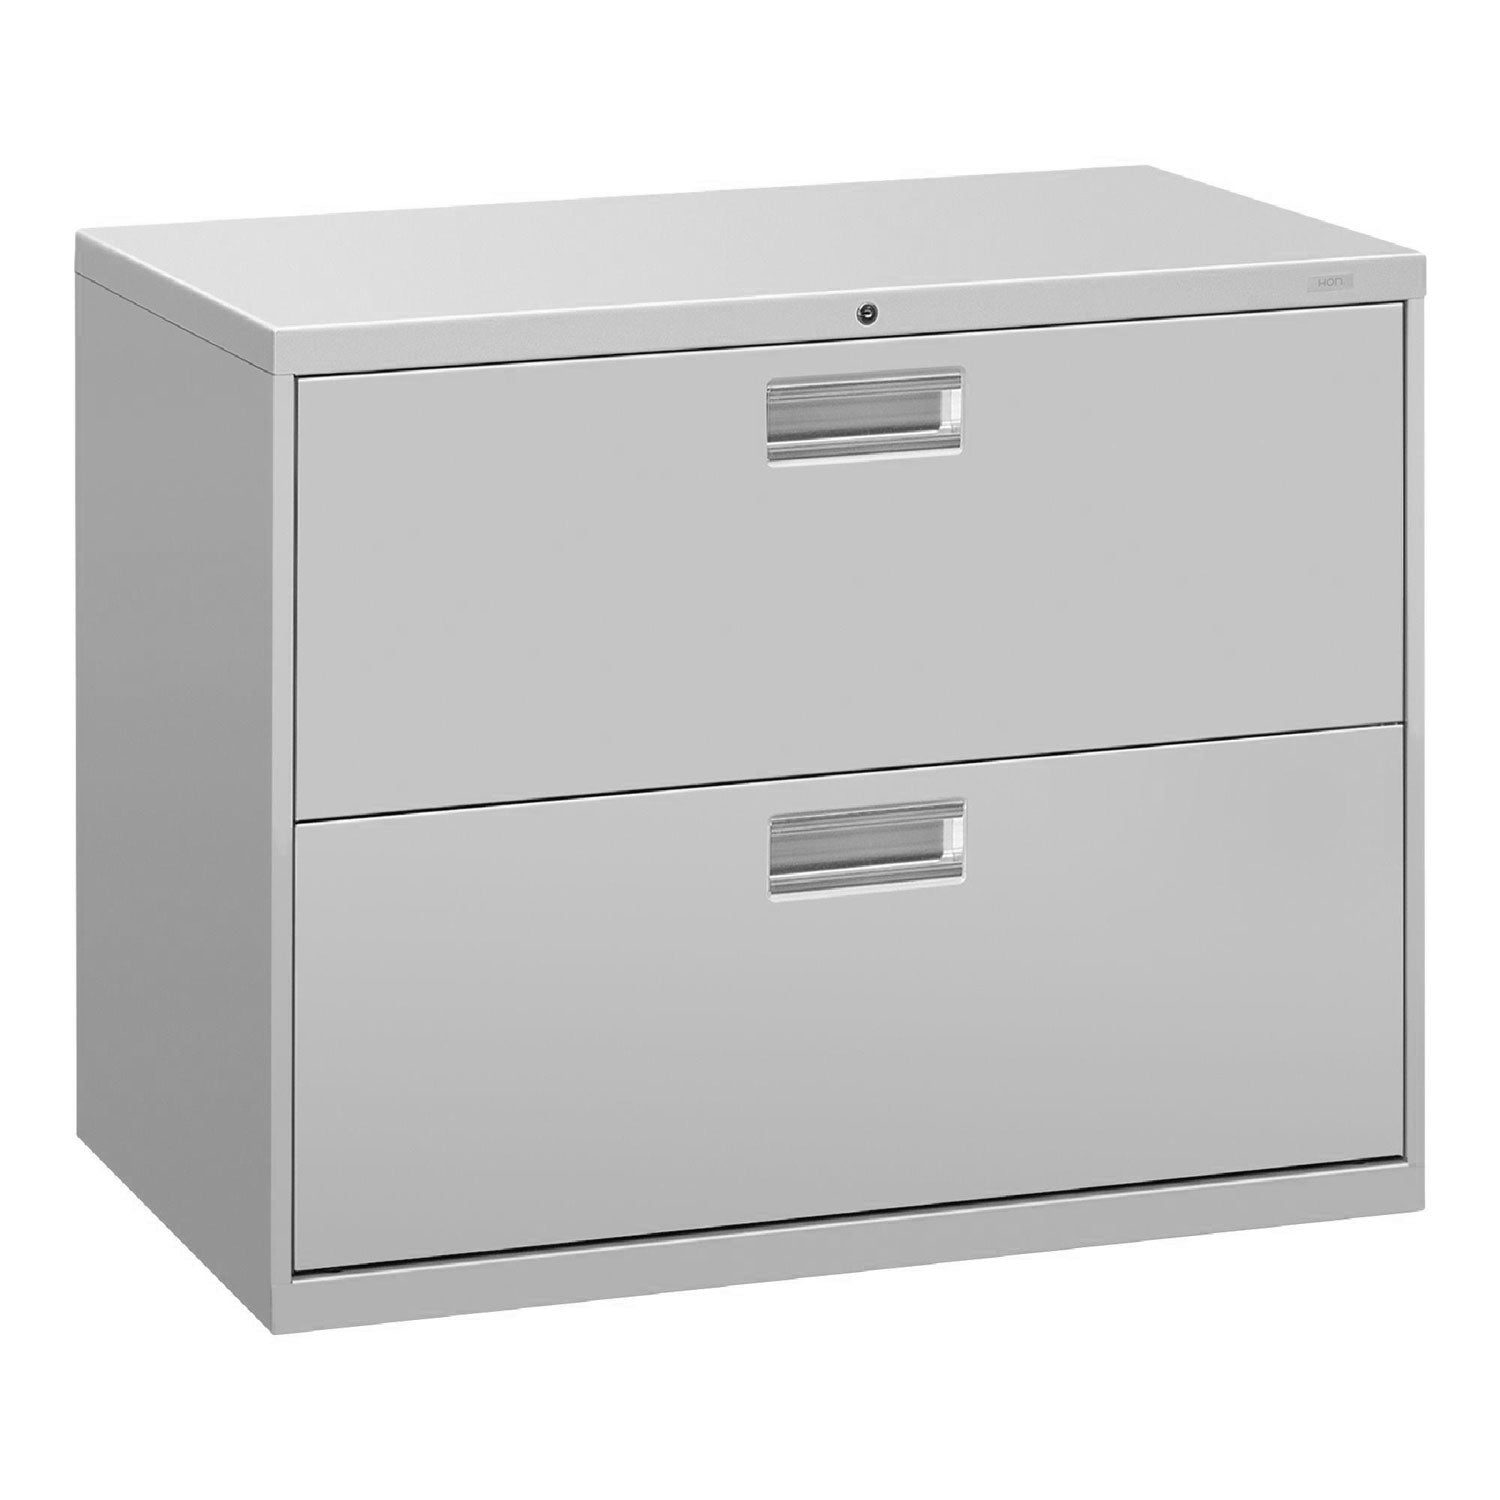 Brigade 600 Series Lateral File, 2 Legal/Letter-Size File Drawers, Light Gray, 36" x 18" x 28 - 